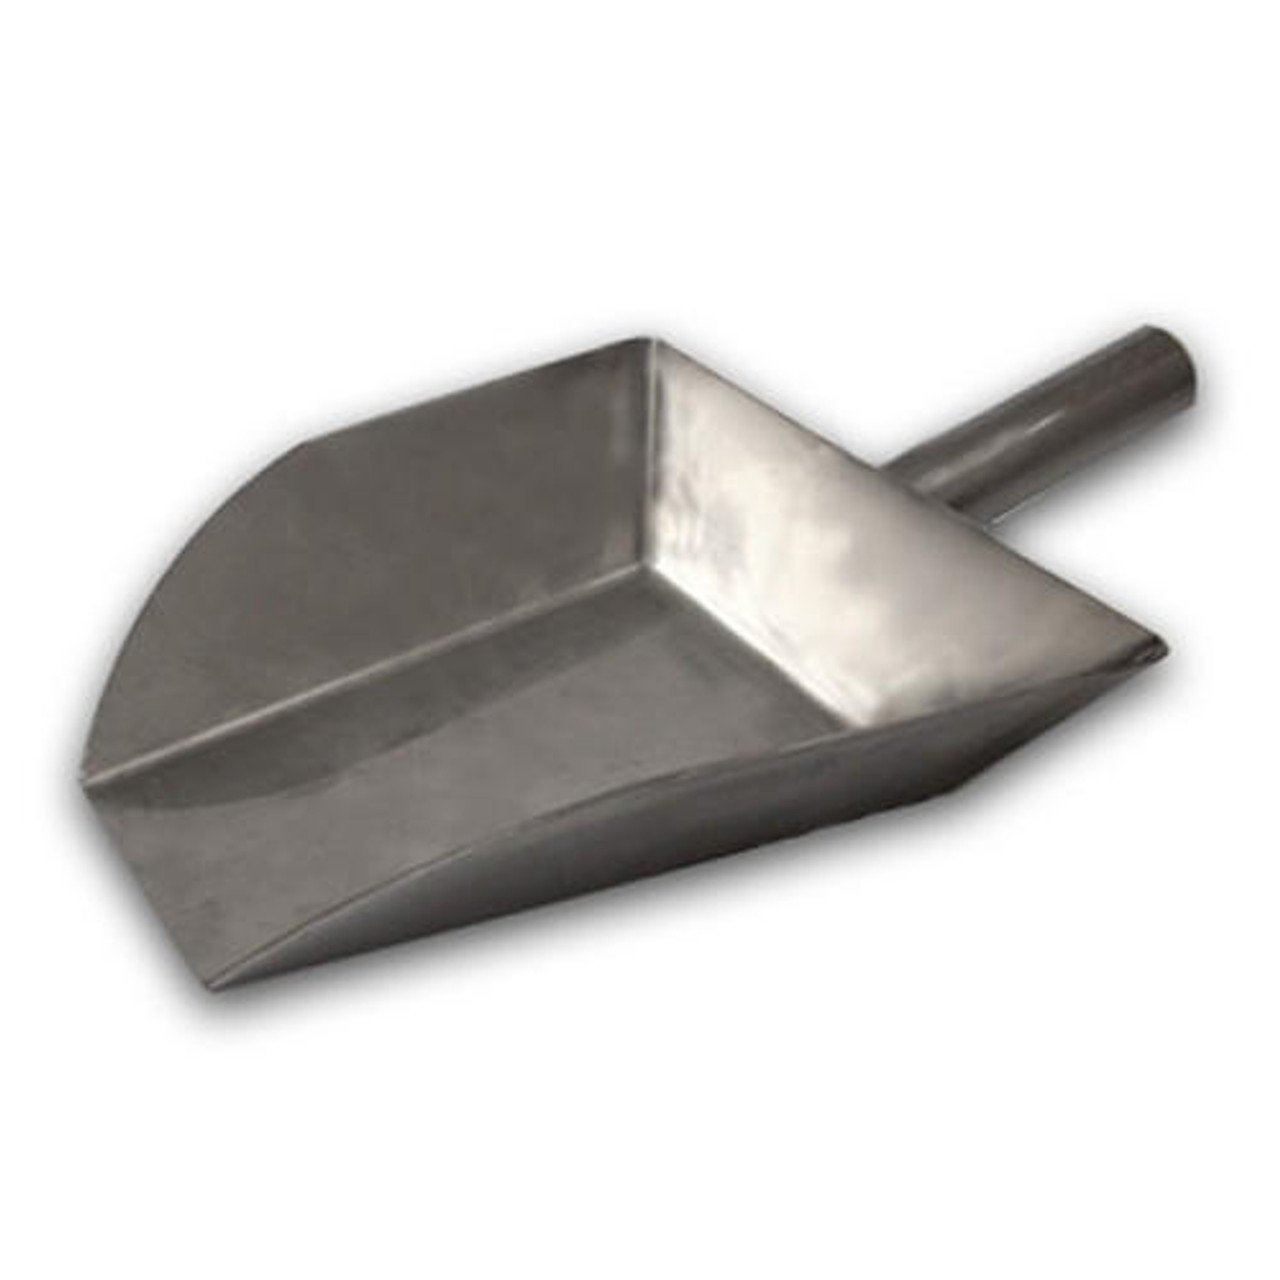 https://cdn11.bigcommerce.com/s-zgzol/images/stencil/1280x1280/products/47172/138379/deslauriers-scoop-f24-stainless-steel-scoop-24oz-flat-bottom__55194.1686685642.jpg?c=2